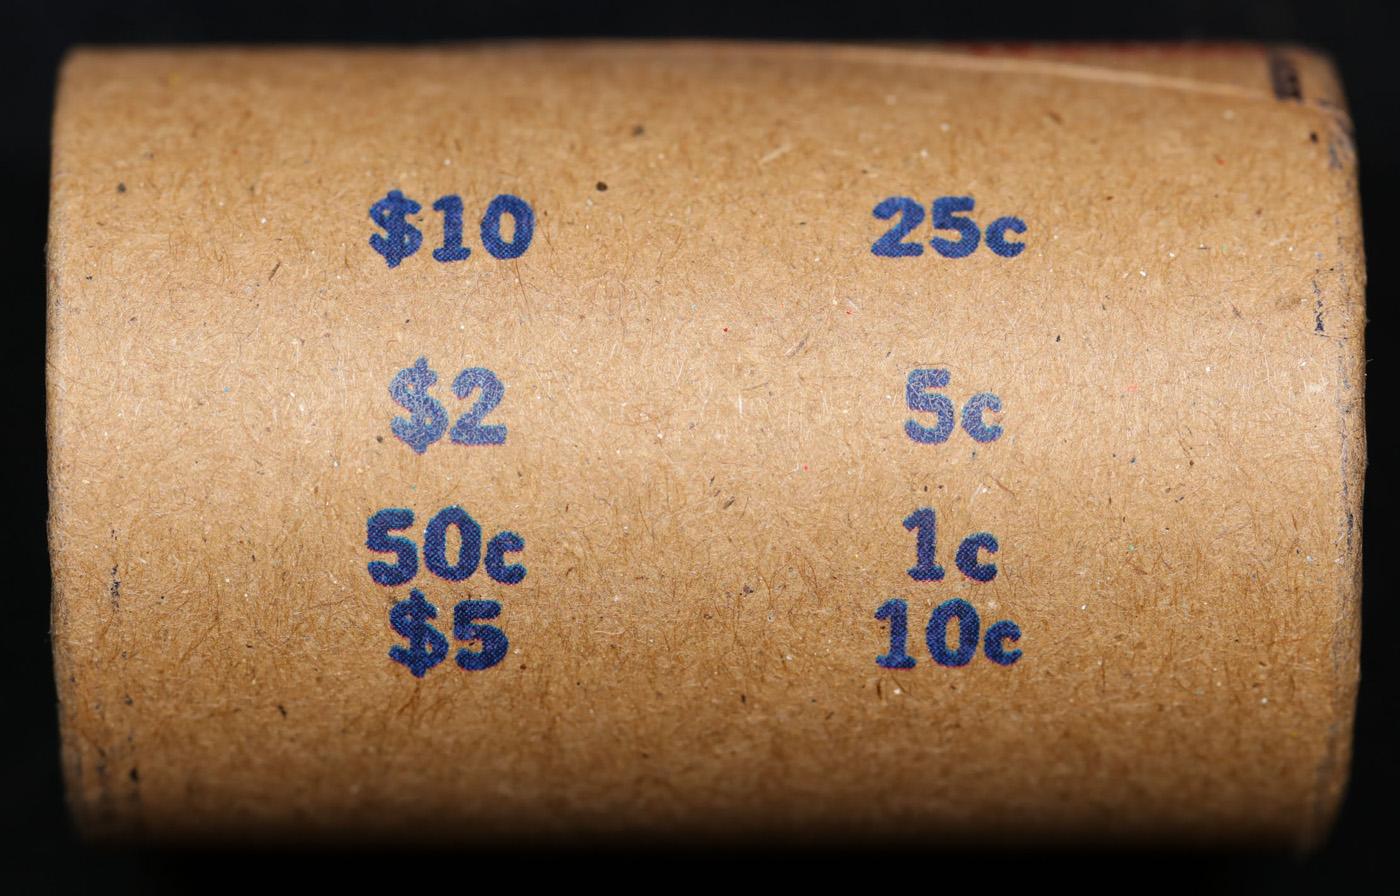 High Value! - Covered End Roll - Marked " Morgan Reserve" - Weight shows x20 Coins (FC)